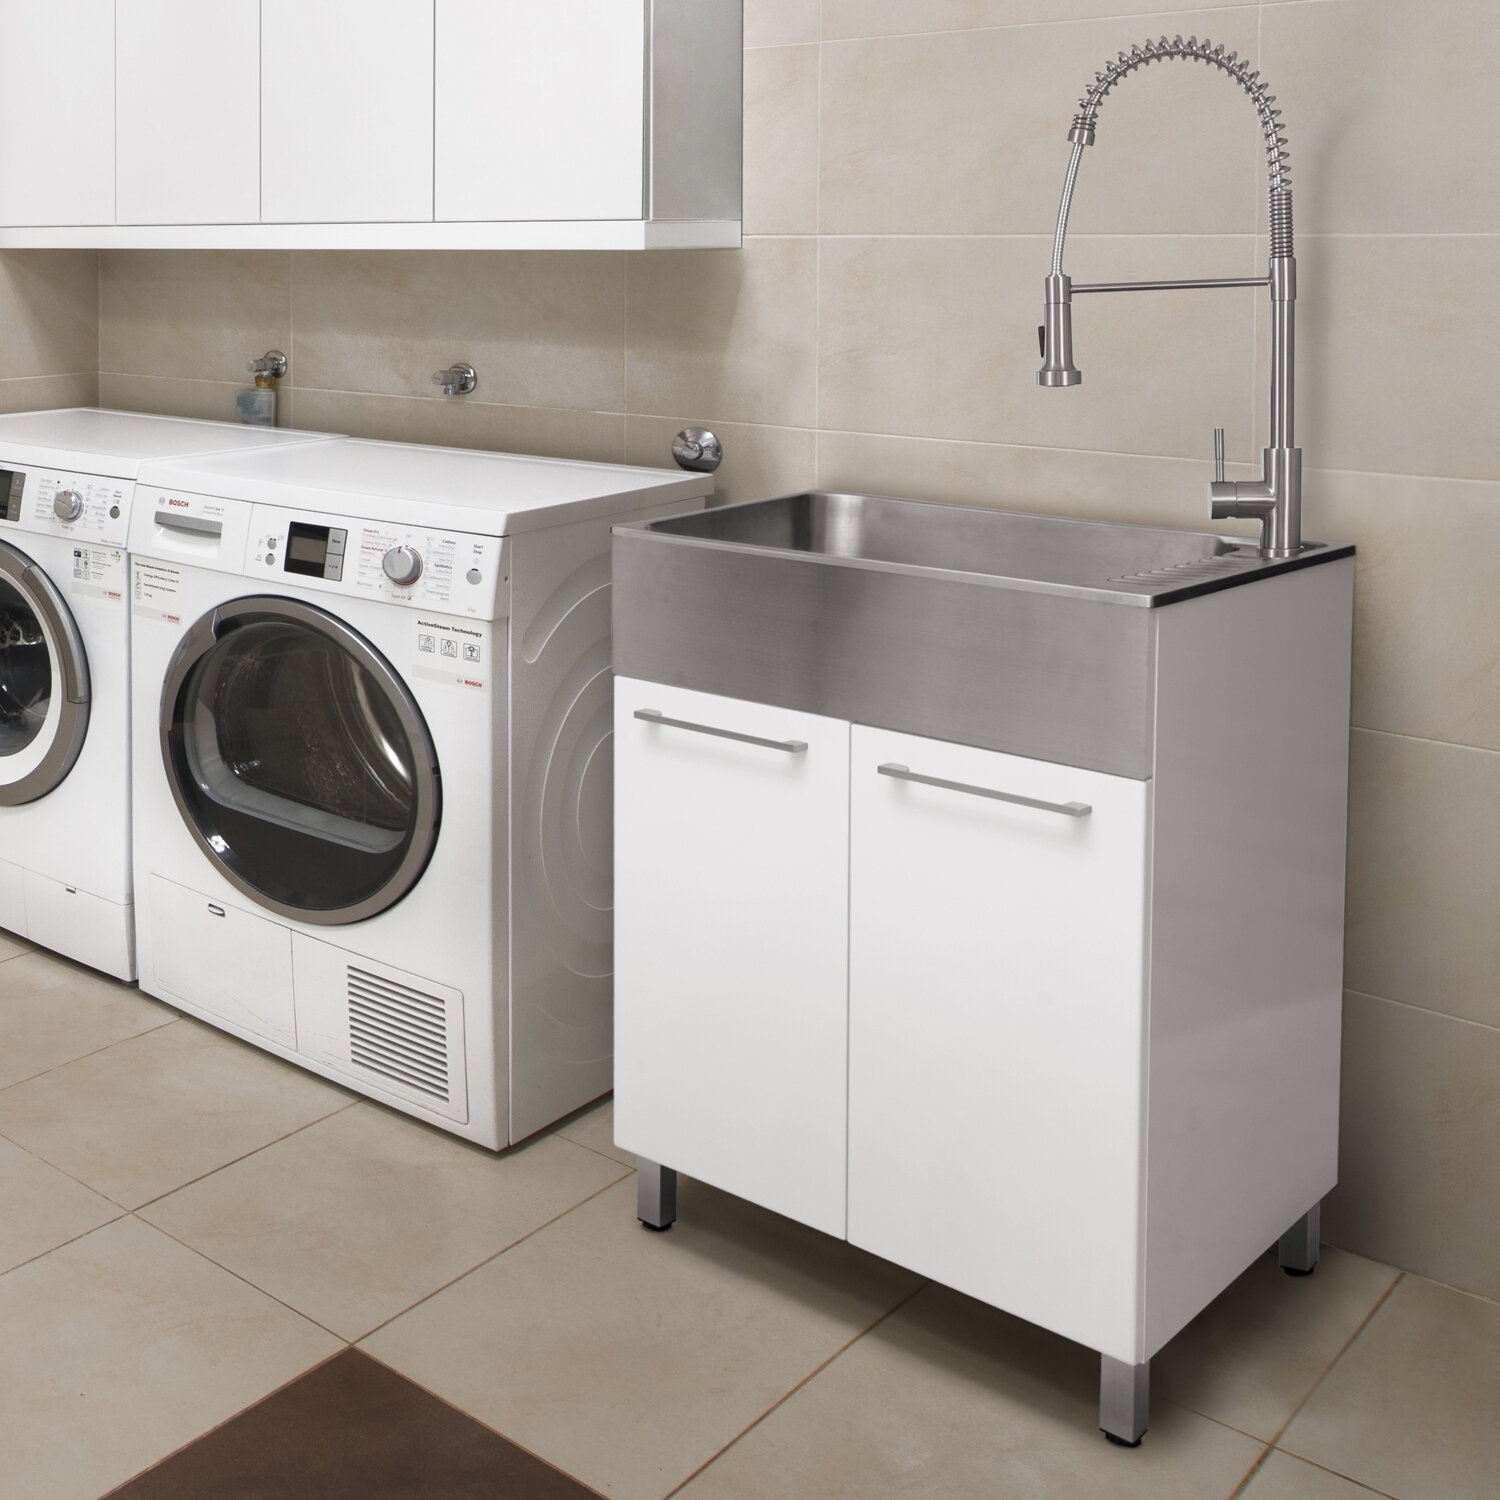 Laundry Room Sink Cabinet Visualhunt